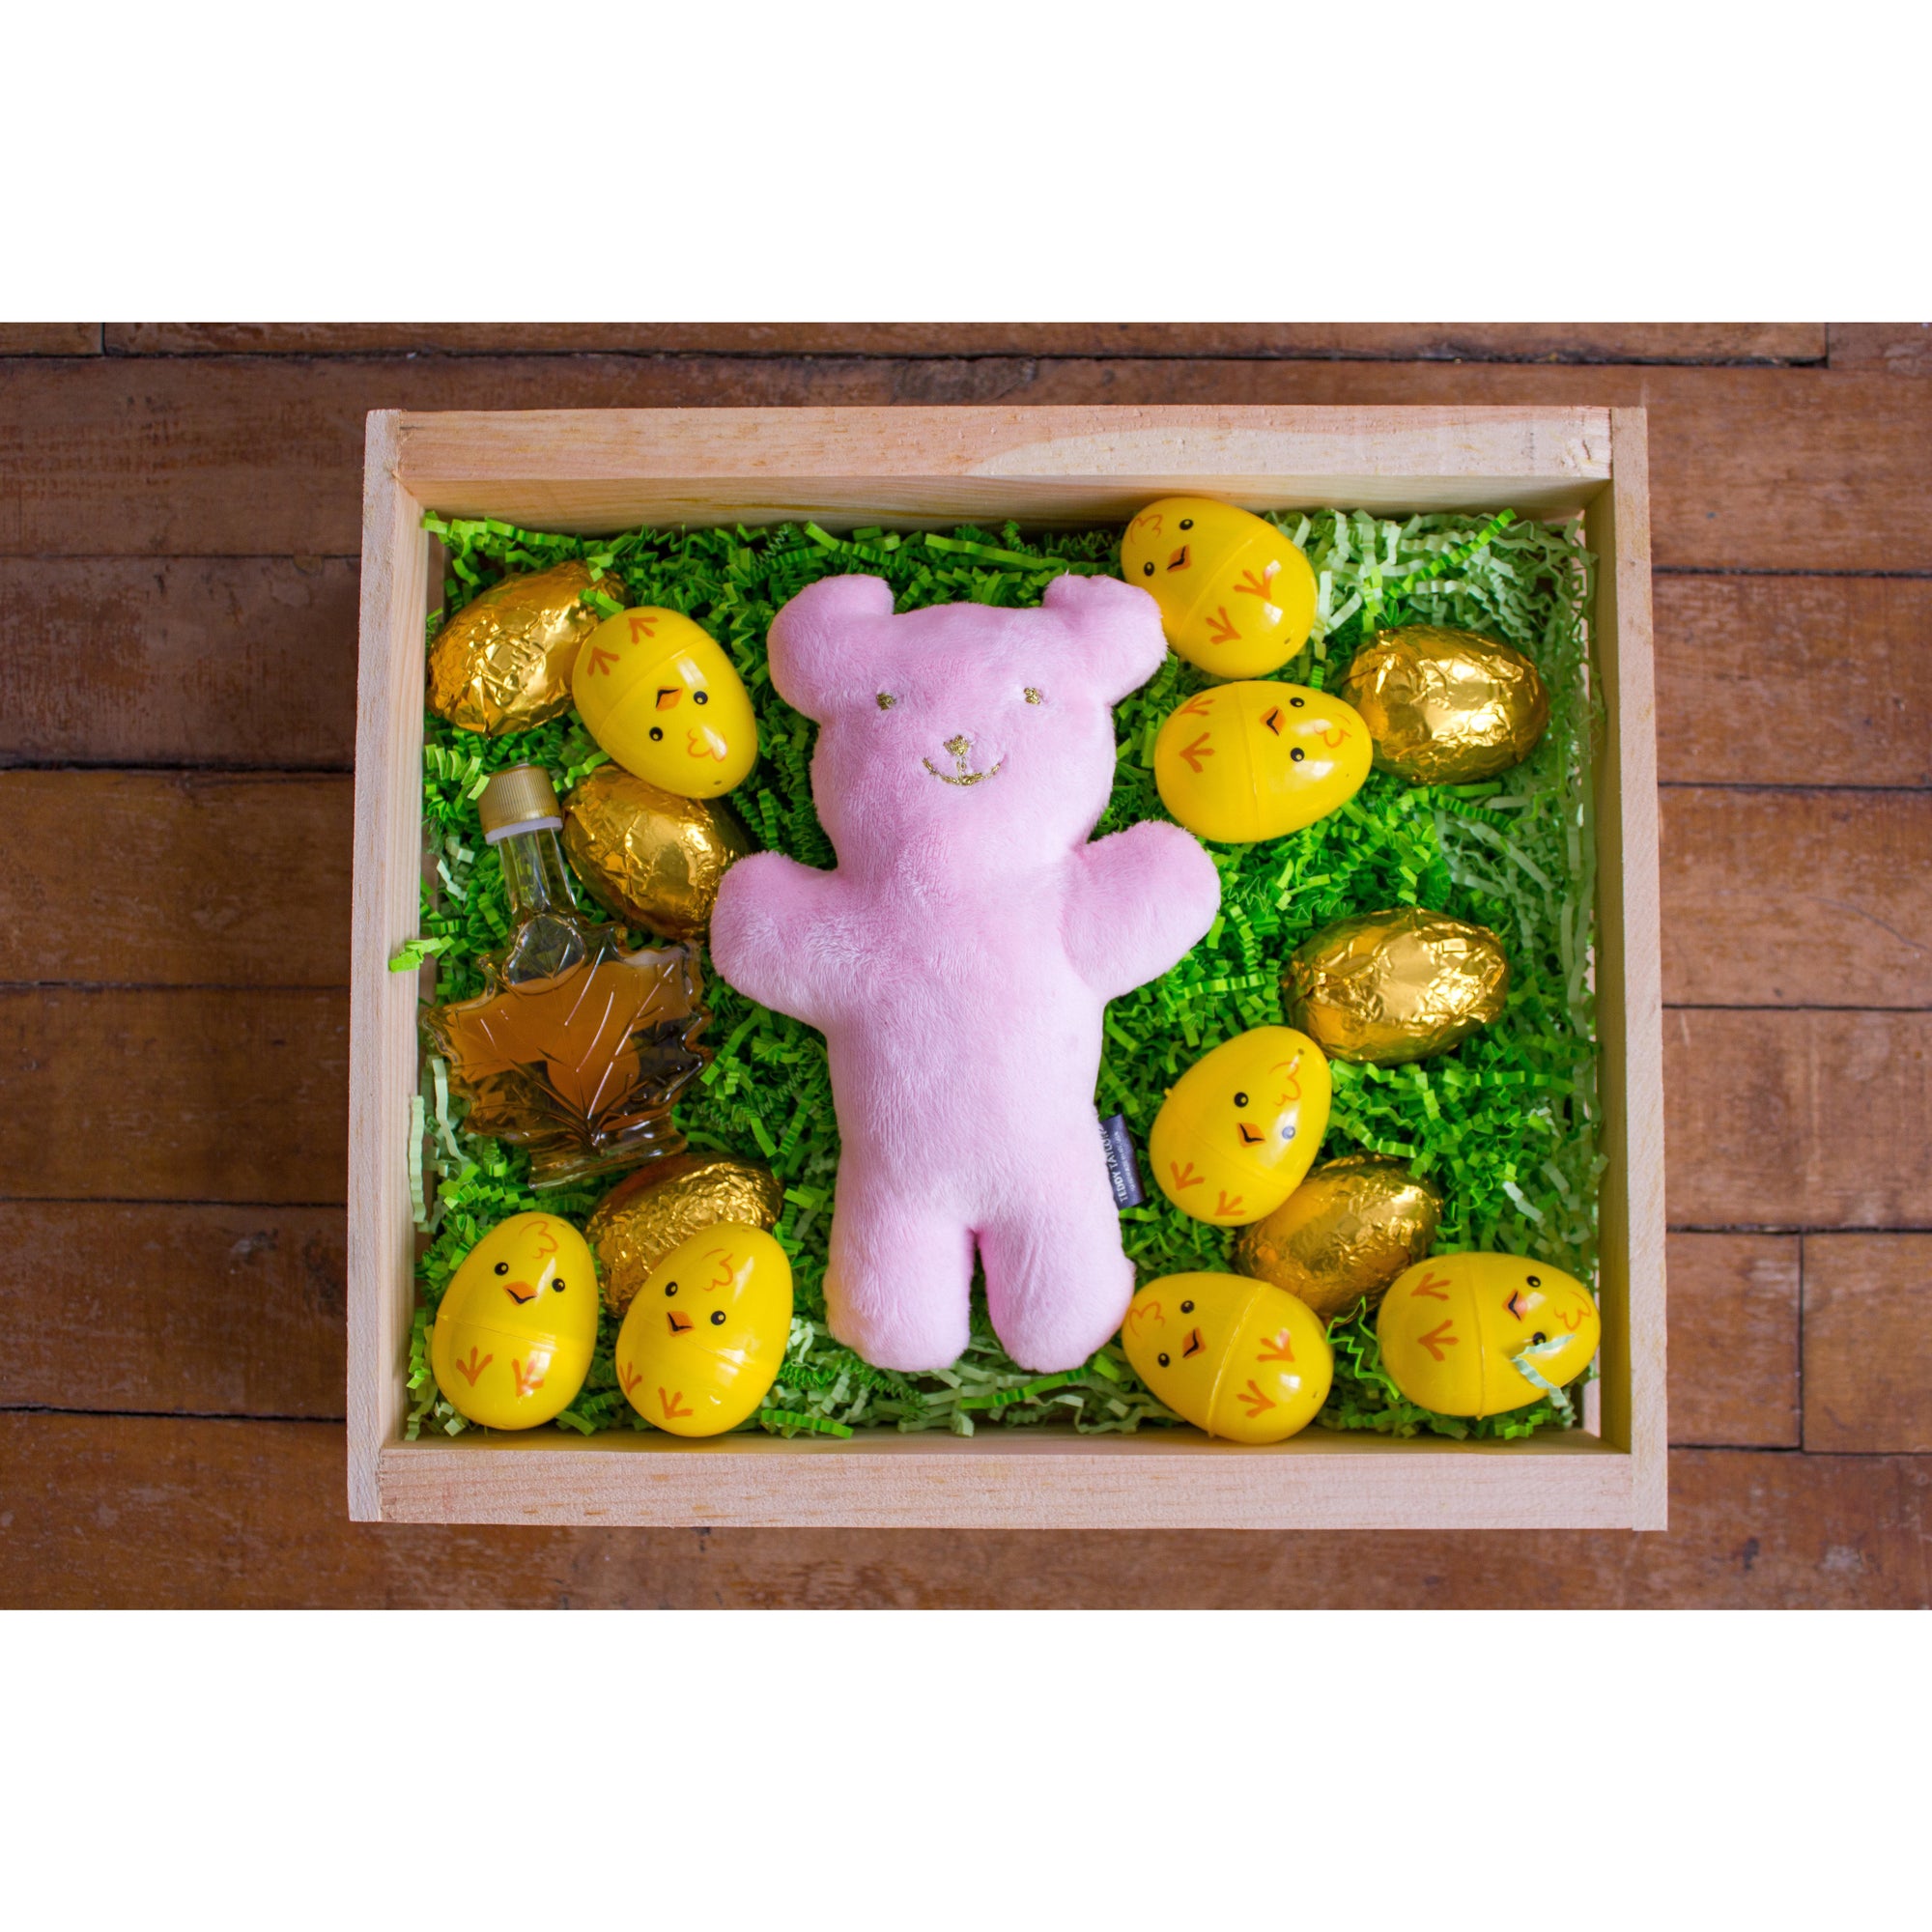 CHILDREN'S MAPLE CANDY EASTER CRATE